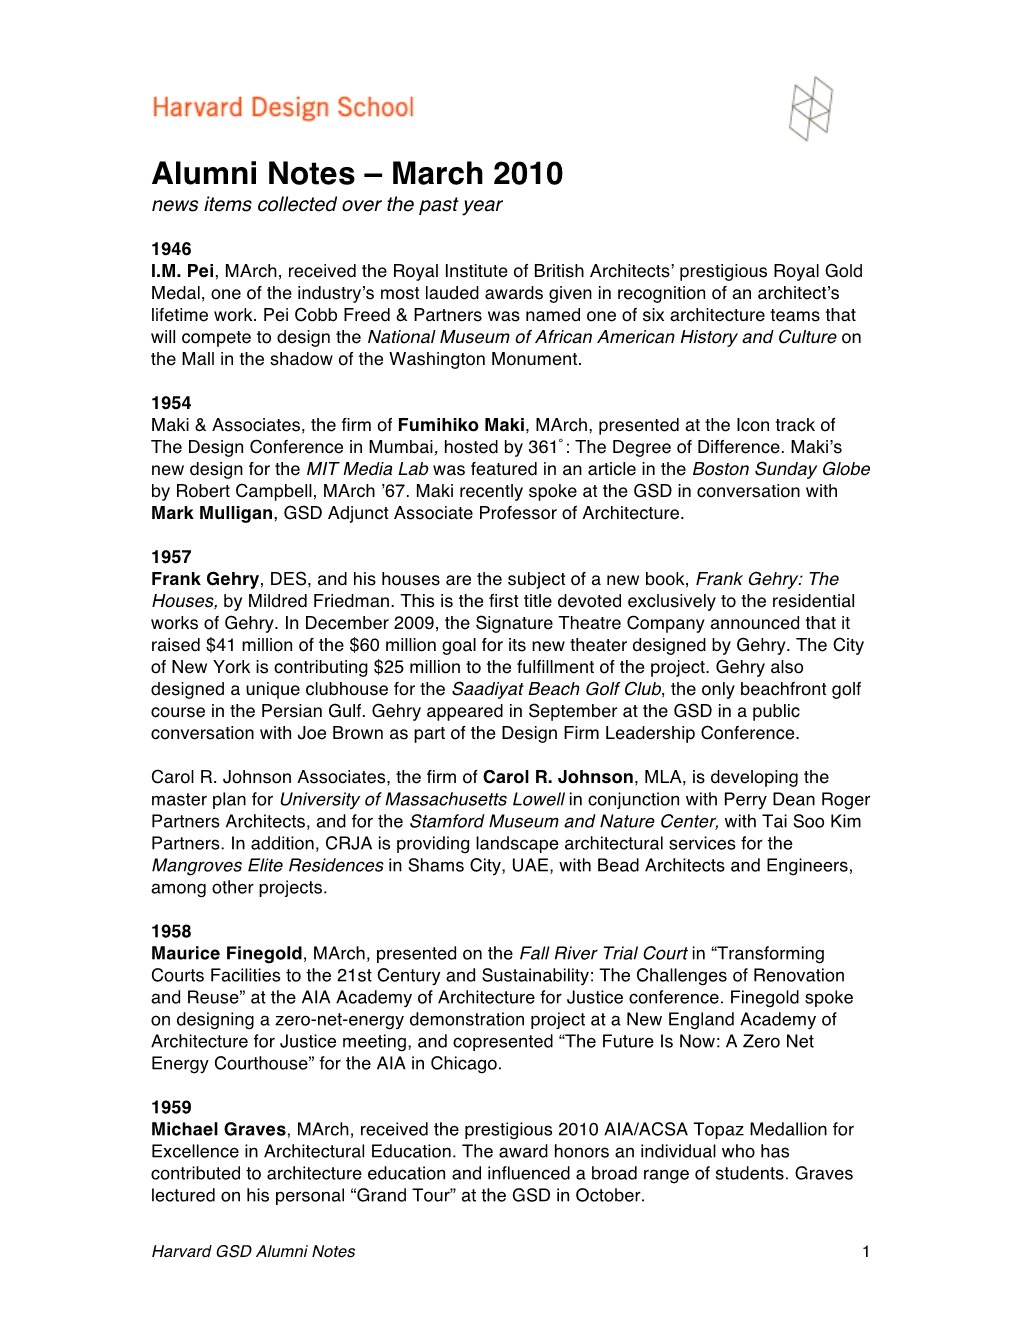 March 2010 for on Line Alumni Notes